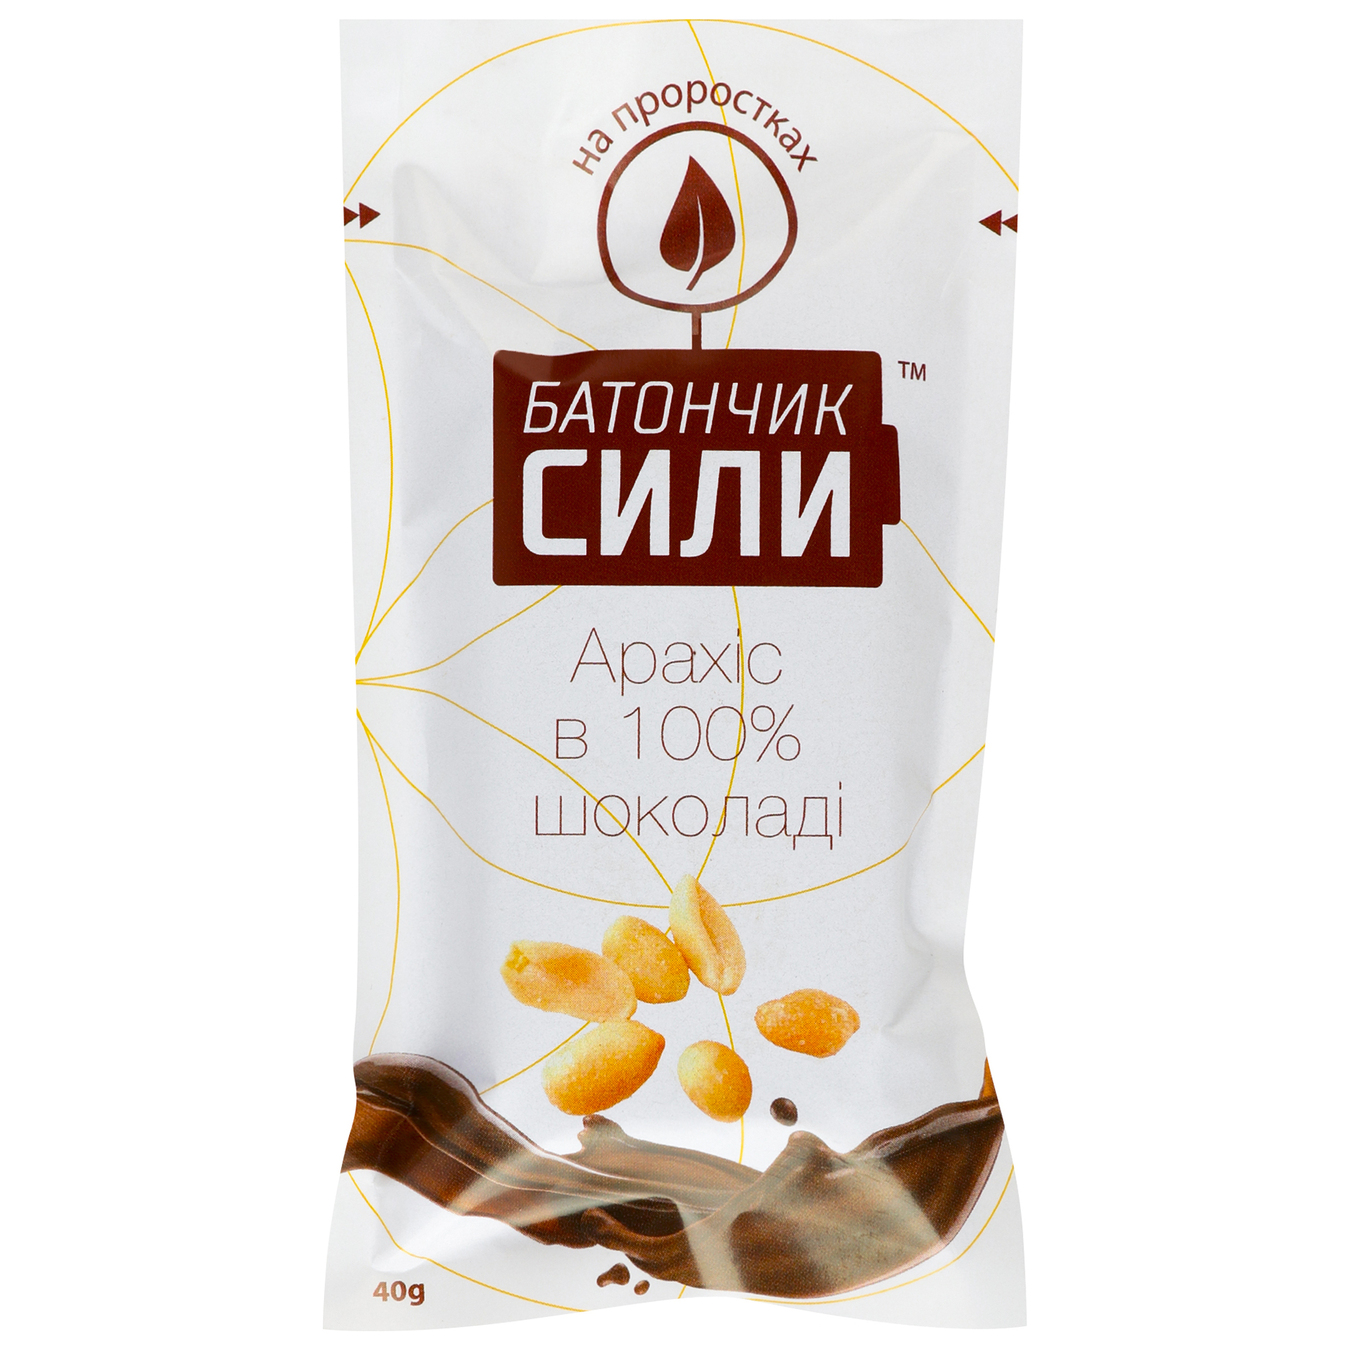 Bar chocolate masters Sily peanuts in 100% chocolate 40g